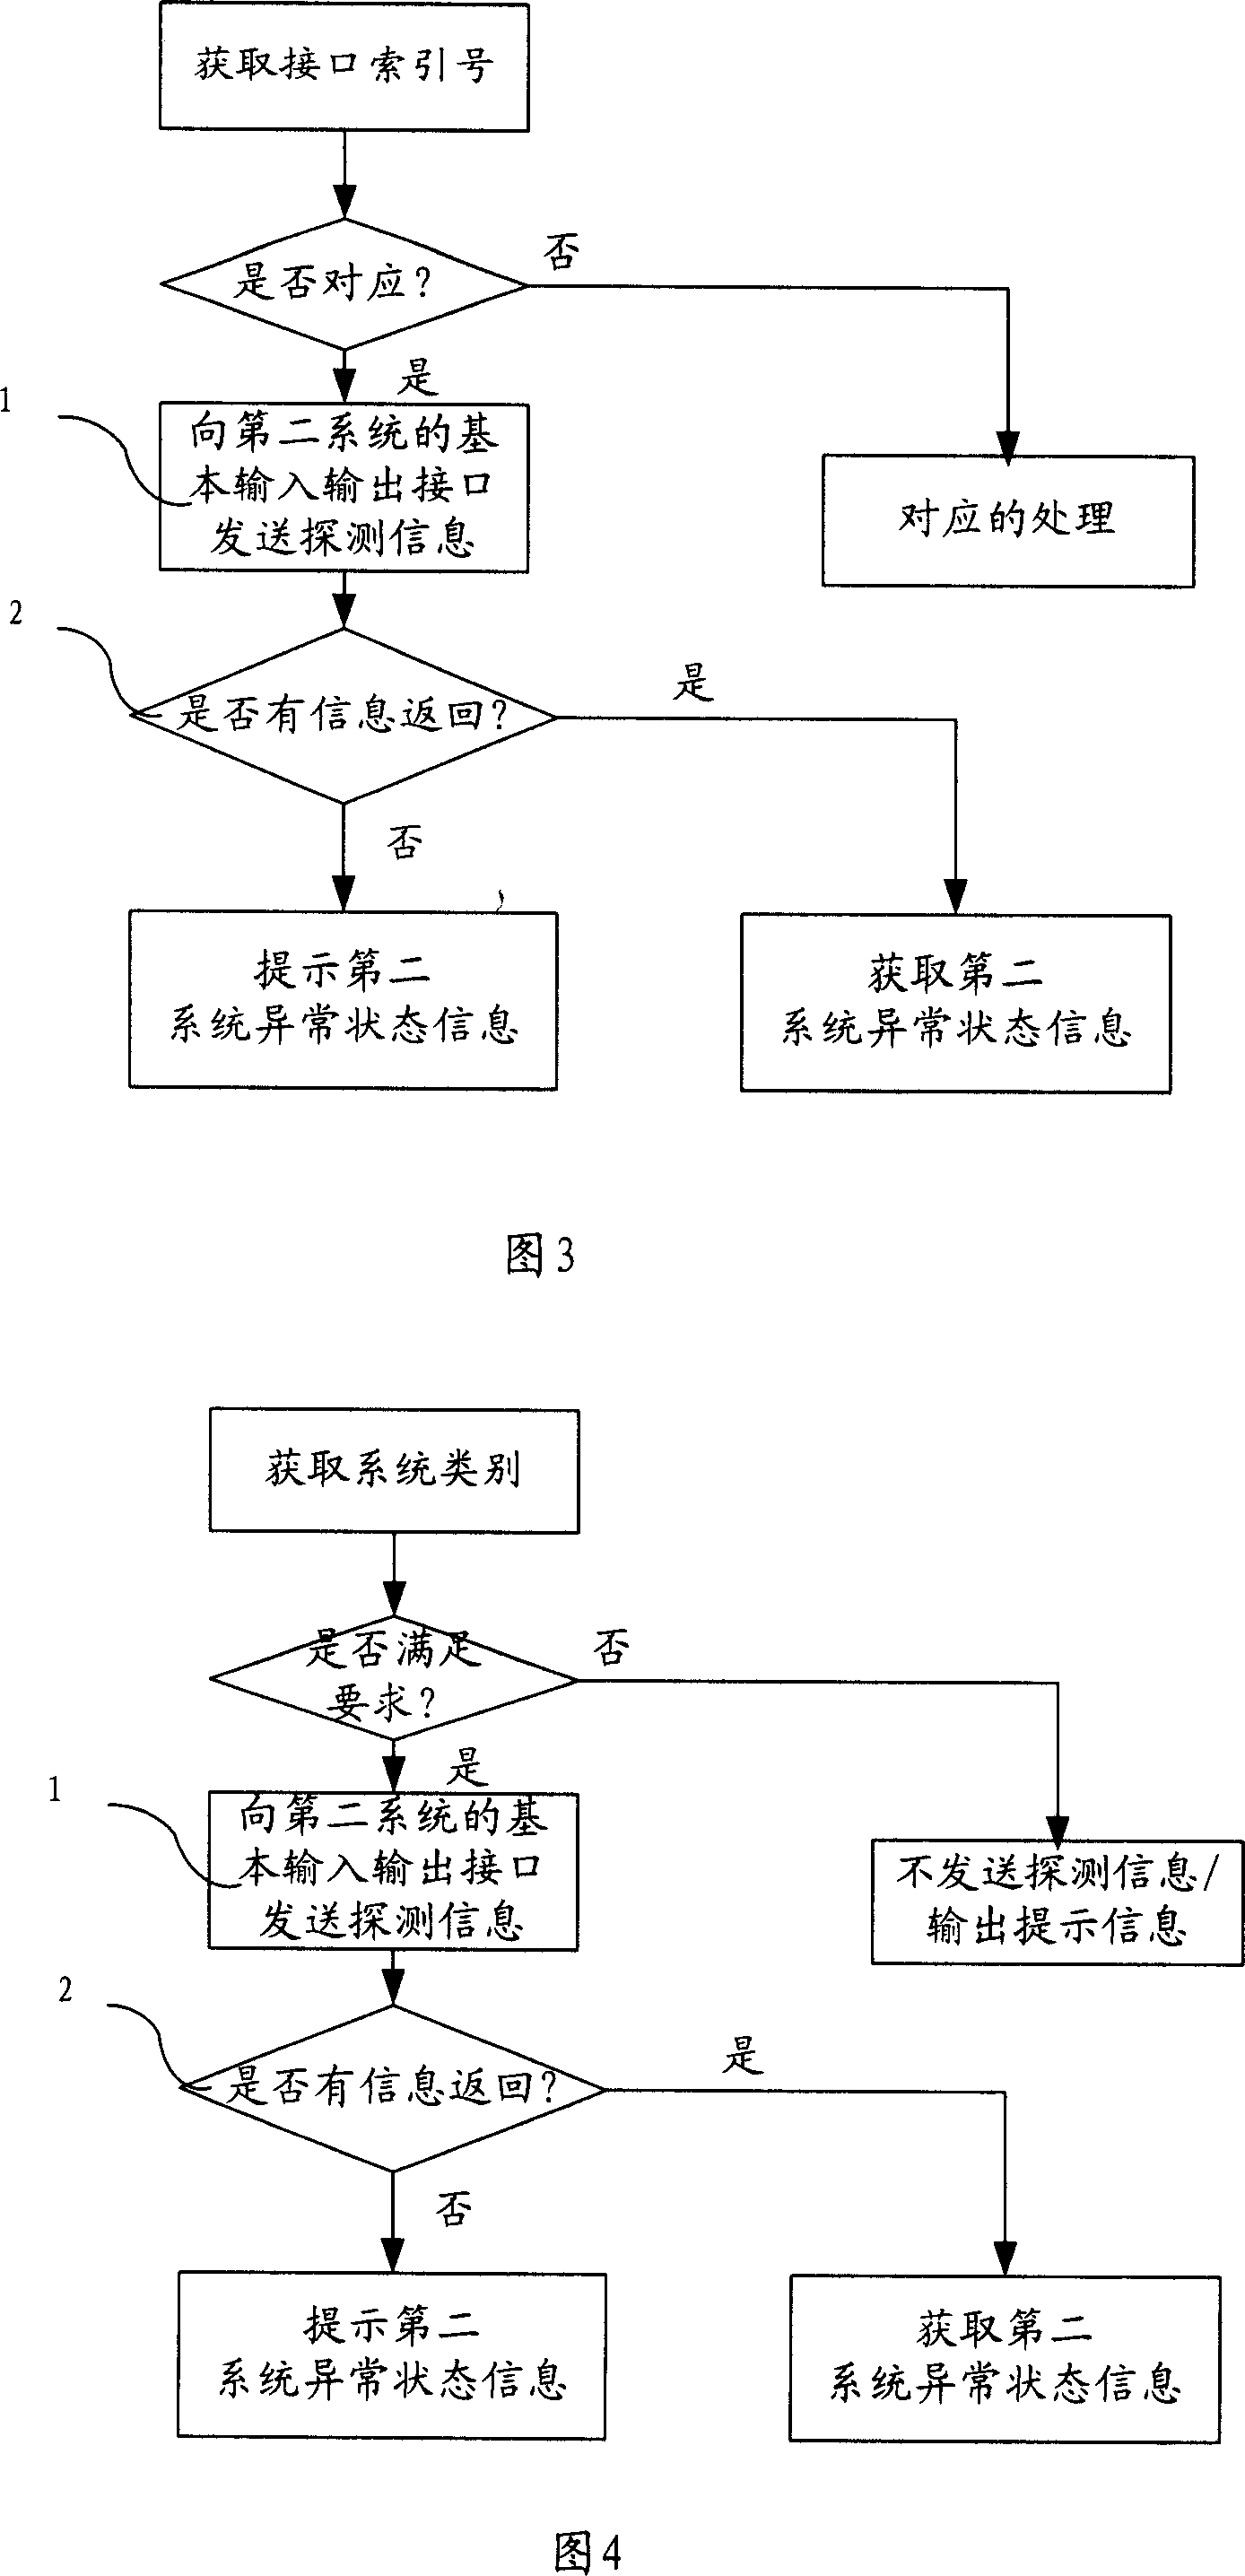 Method and device for obtaining the system status